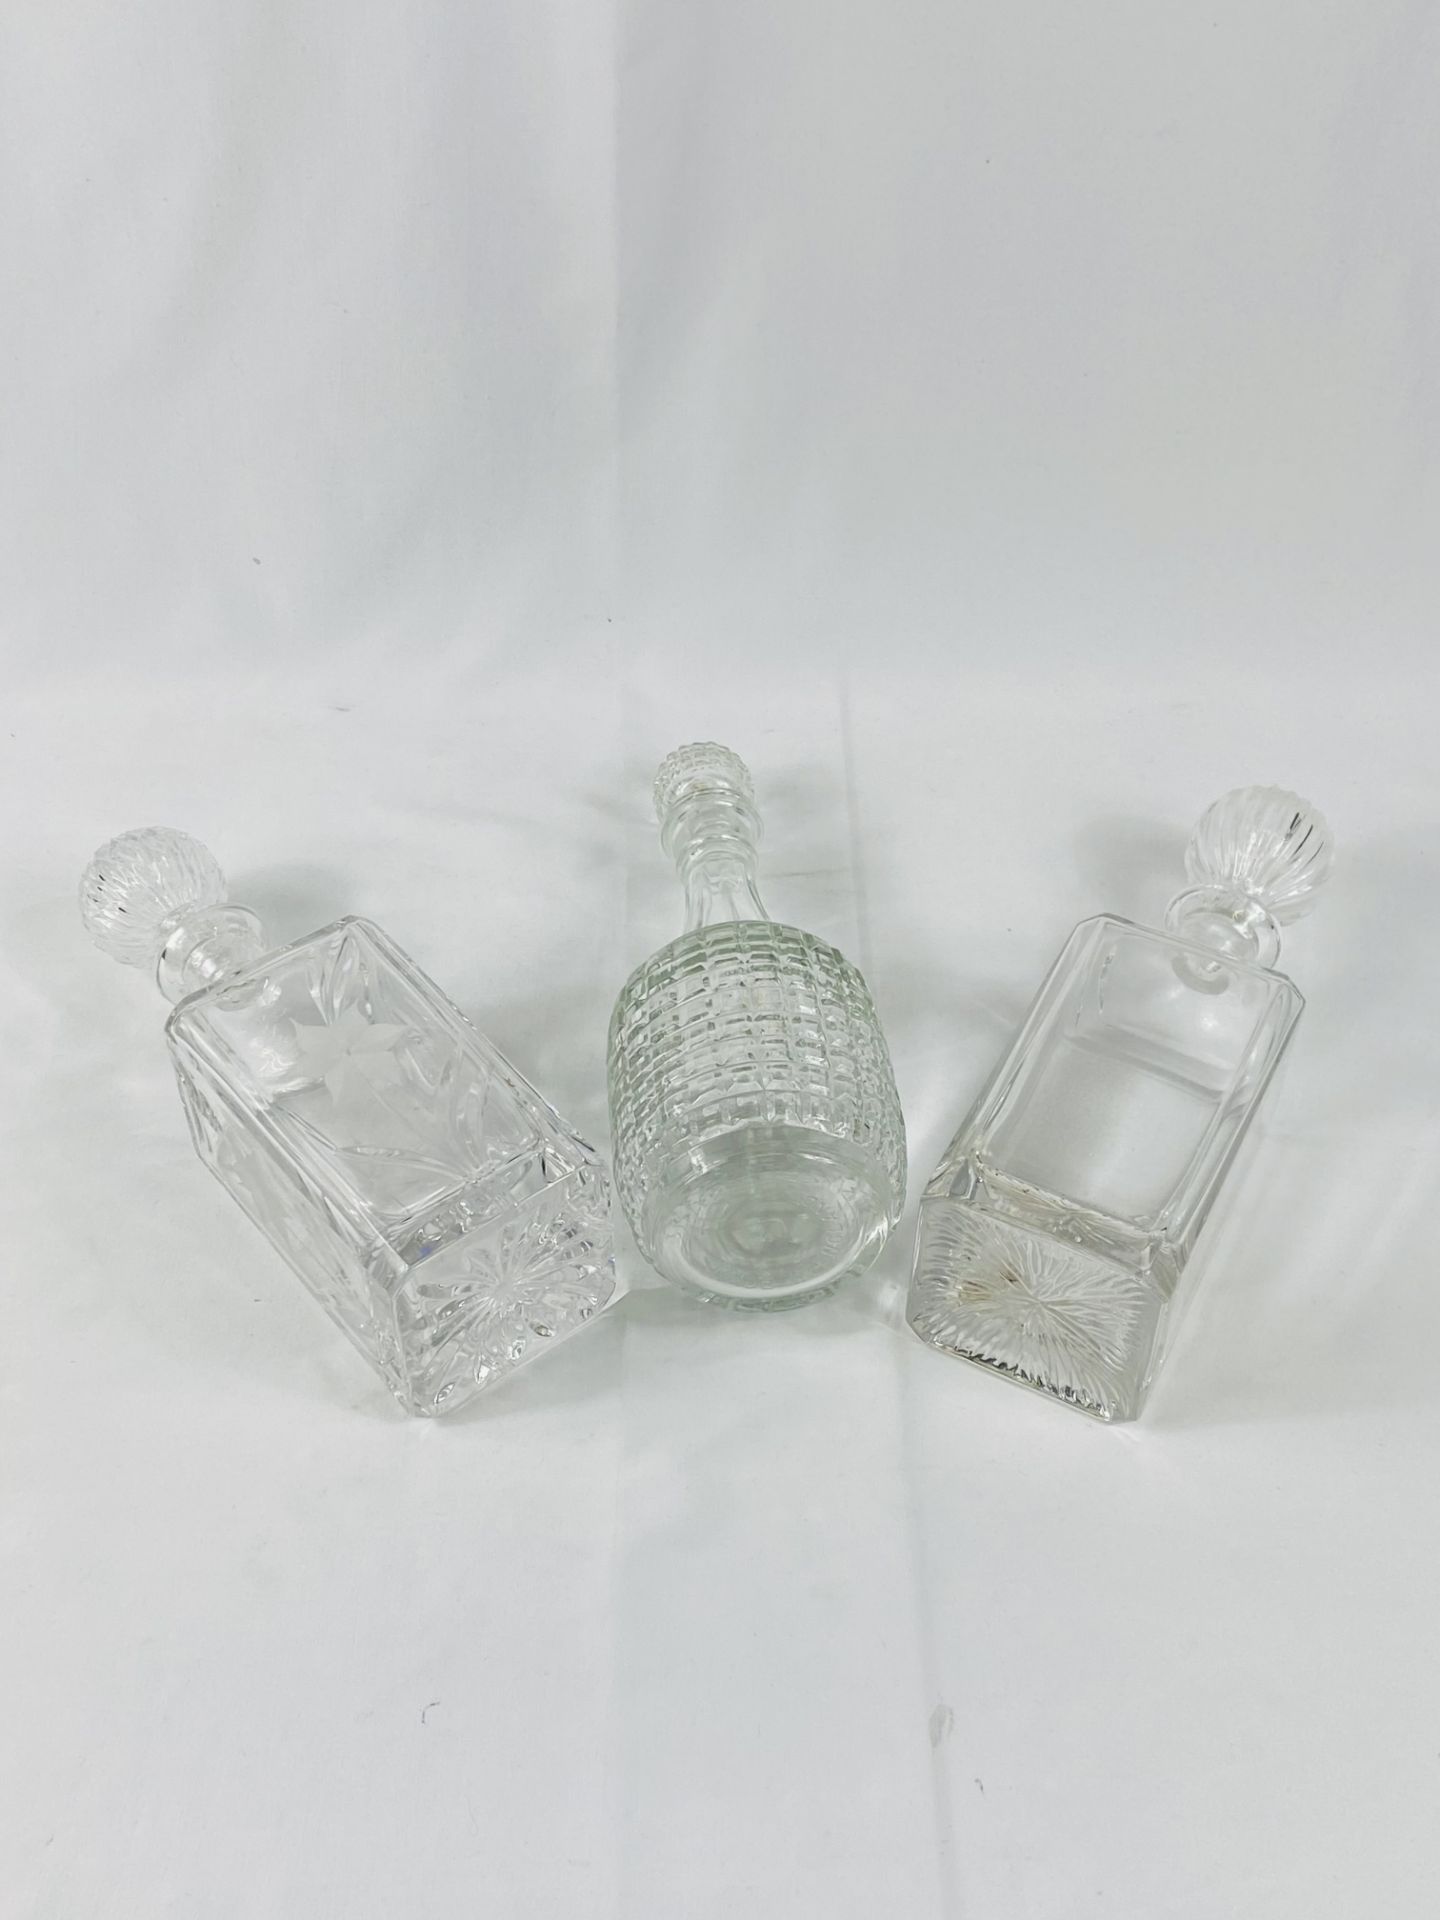 Two cut glass decanters together with a moulded glass decanter - Image 3 of 3